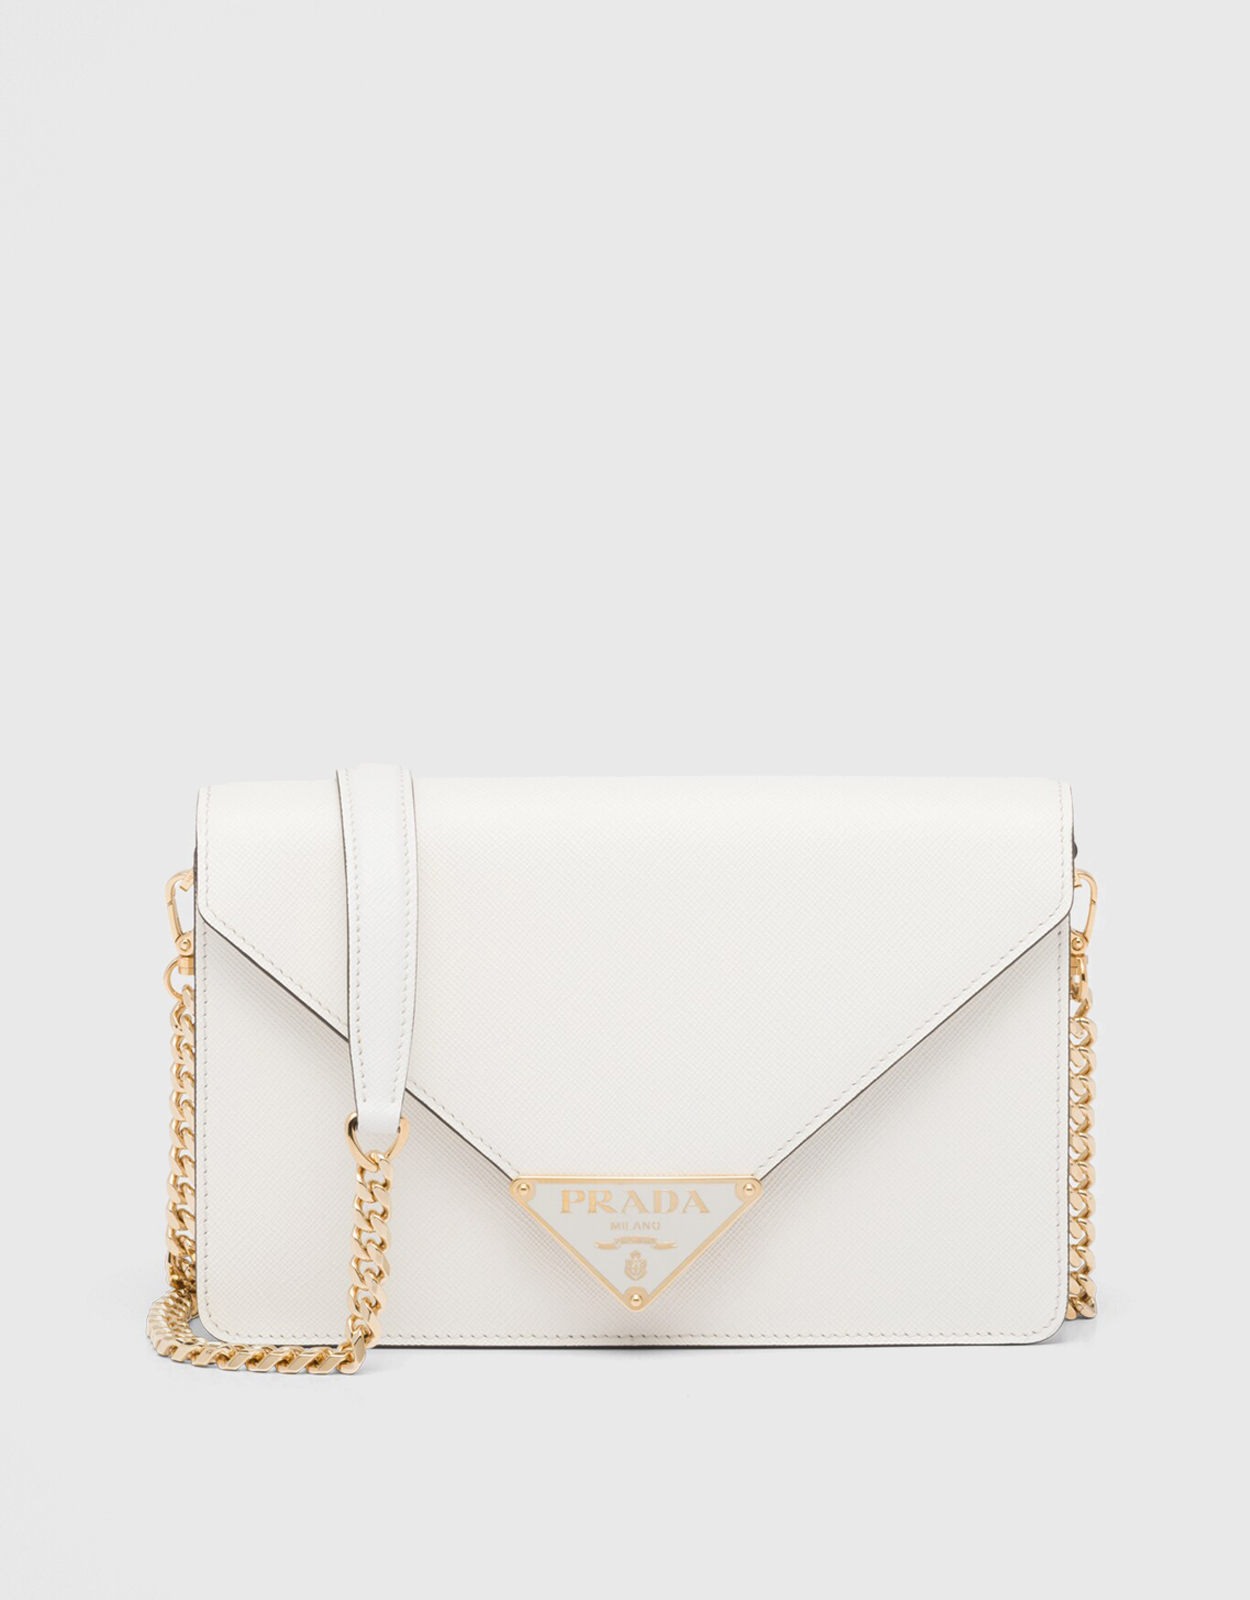 DKNY Gansevoort Quilted Chain Shoulder Bag in White | Lyst